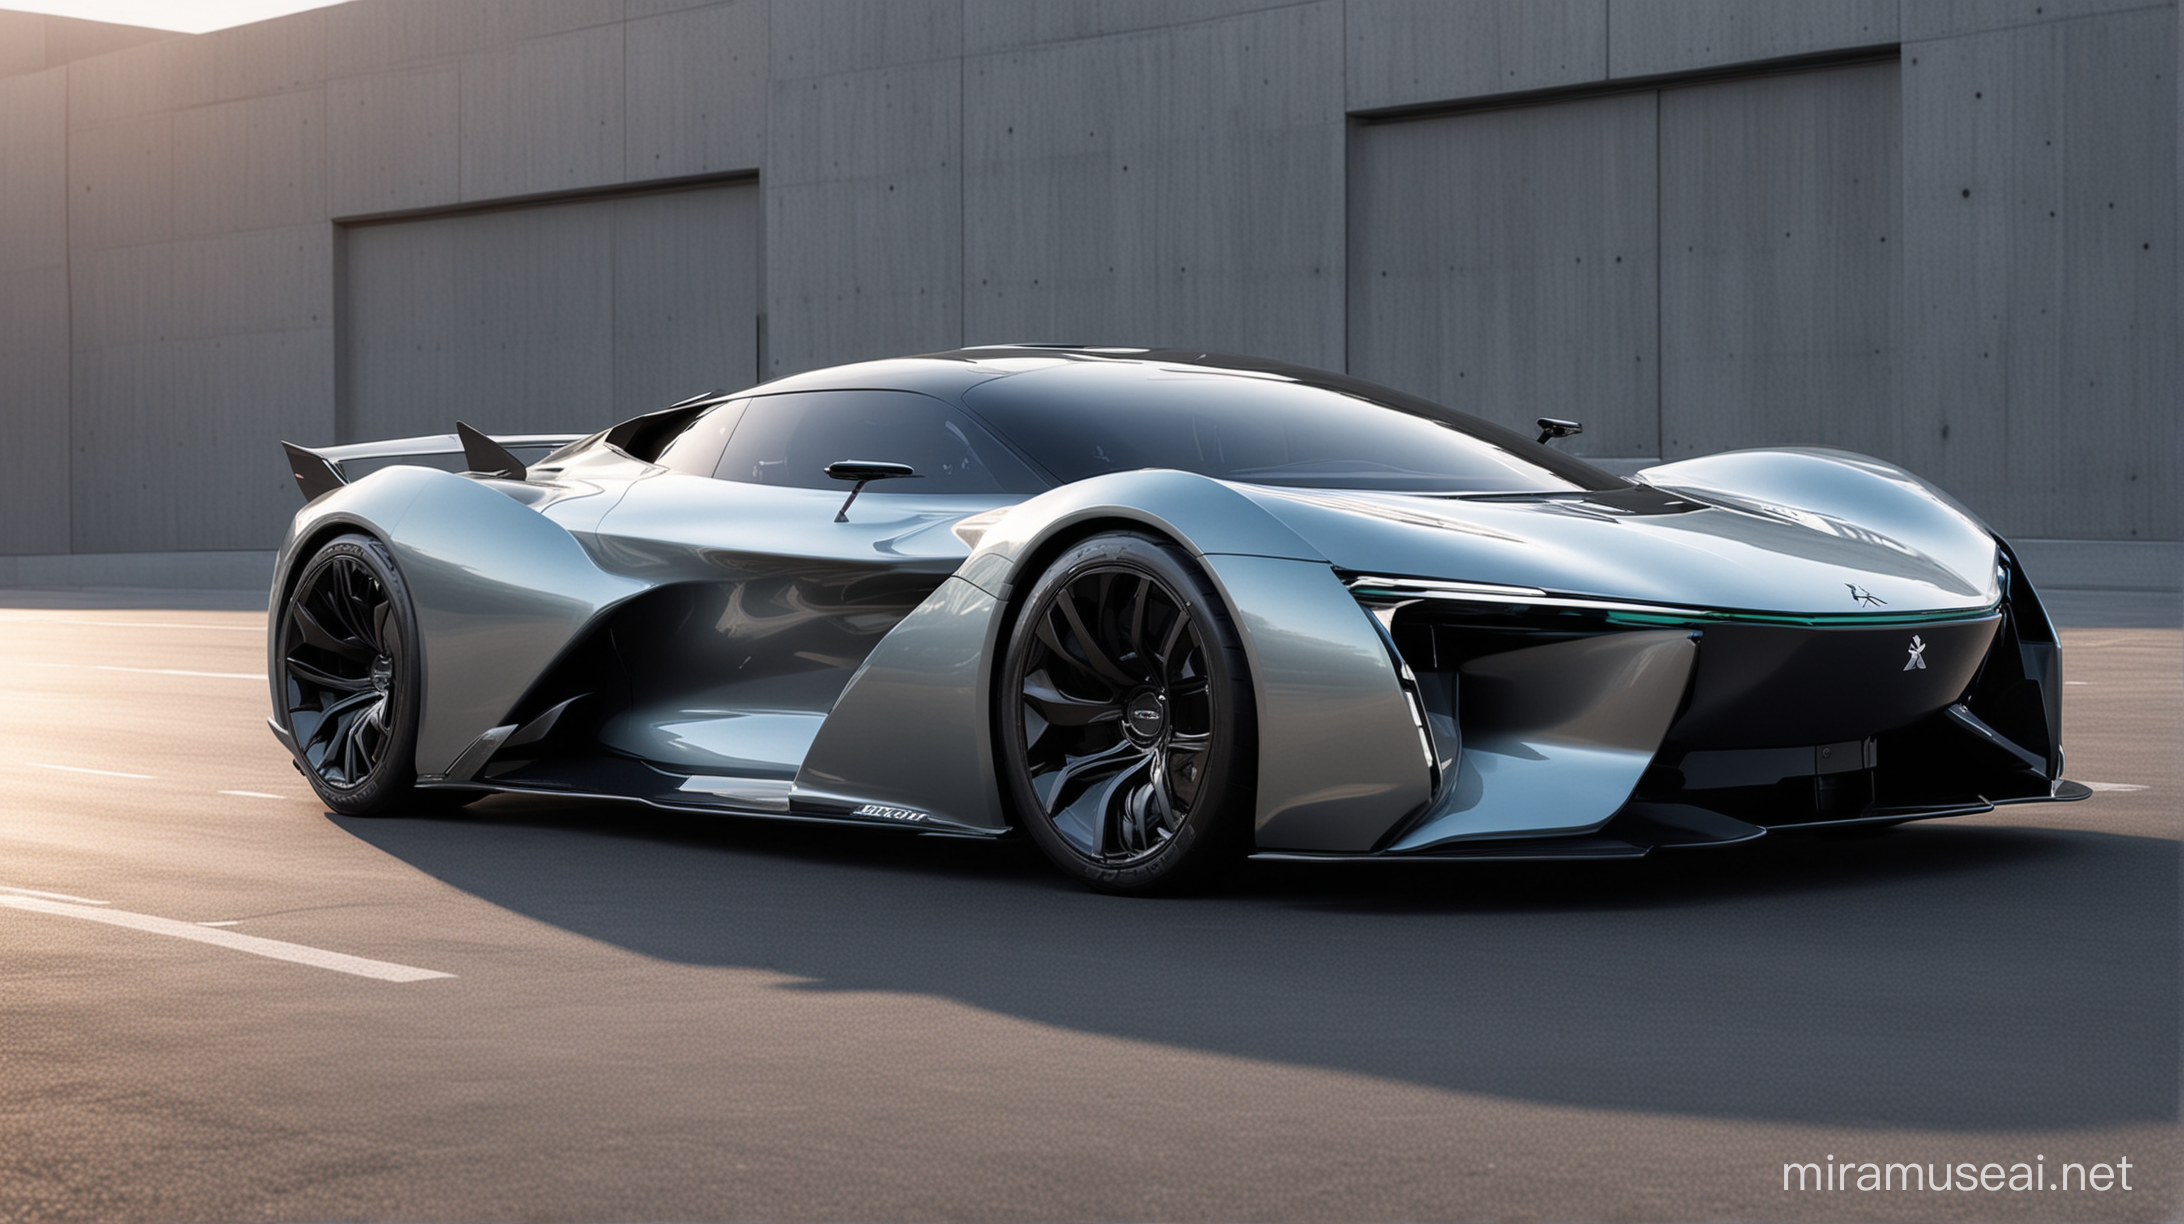 An electric hypercar manufactured by Mitsubishi, which is very futuristic and conceptual, its design is creative and dynamic, it is environmentally friendly.